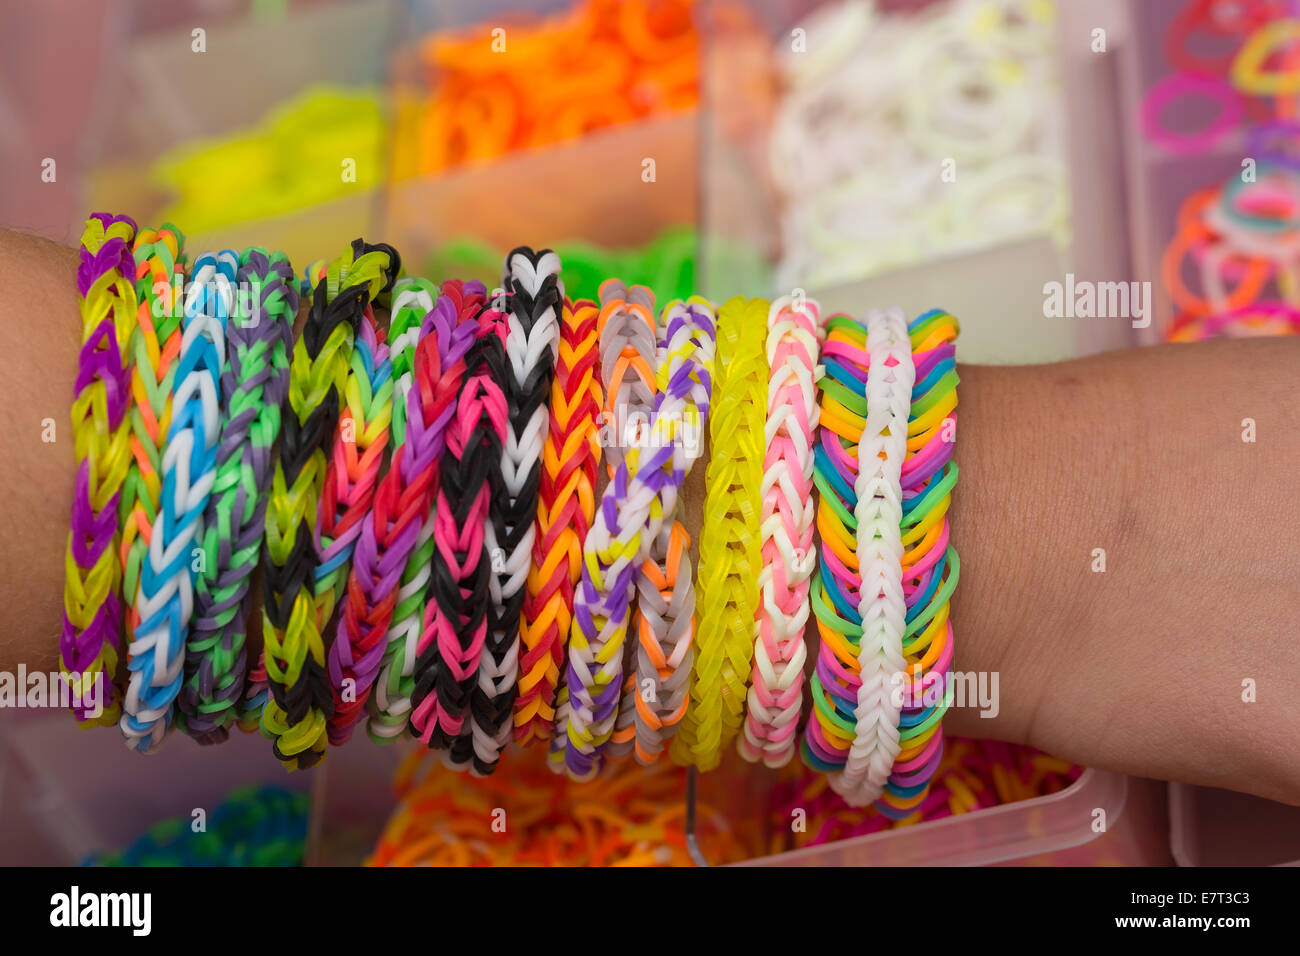 Colorful Rainbow loom rubber bands in a box Stock Photo - Alamy